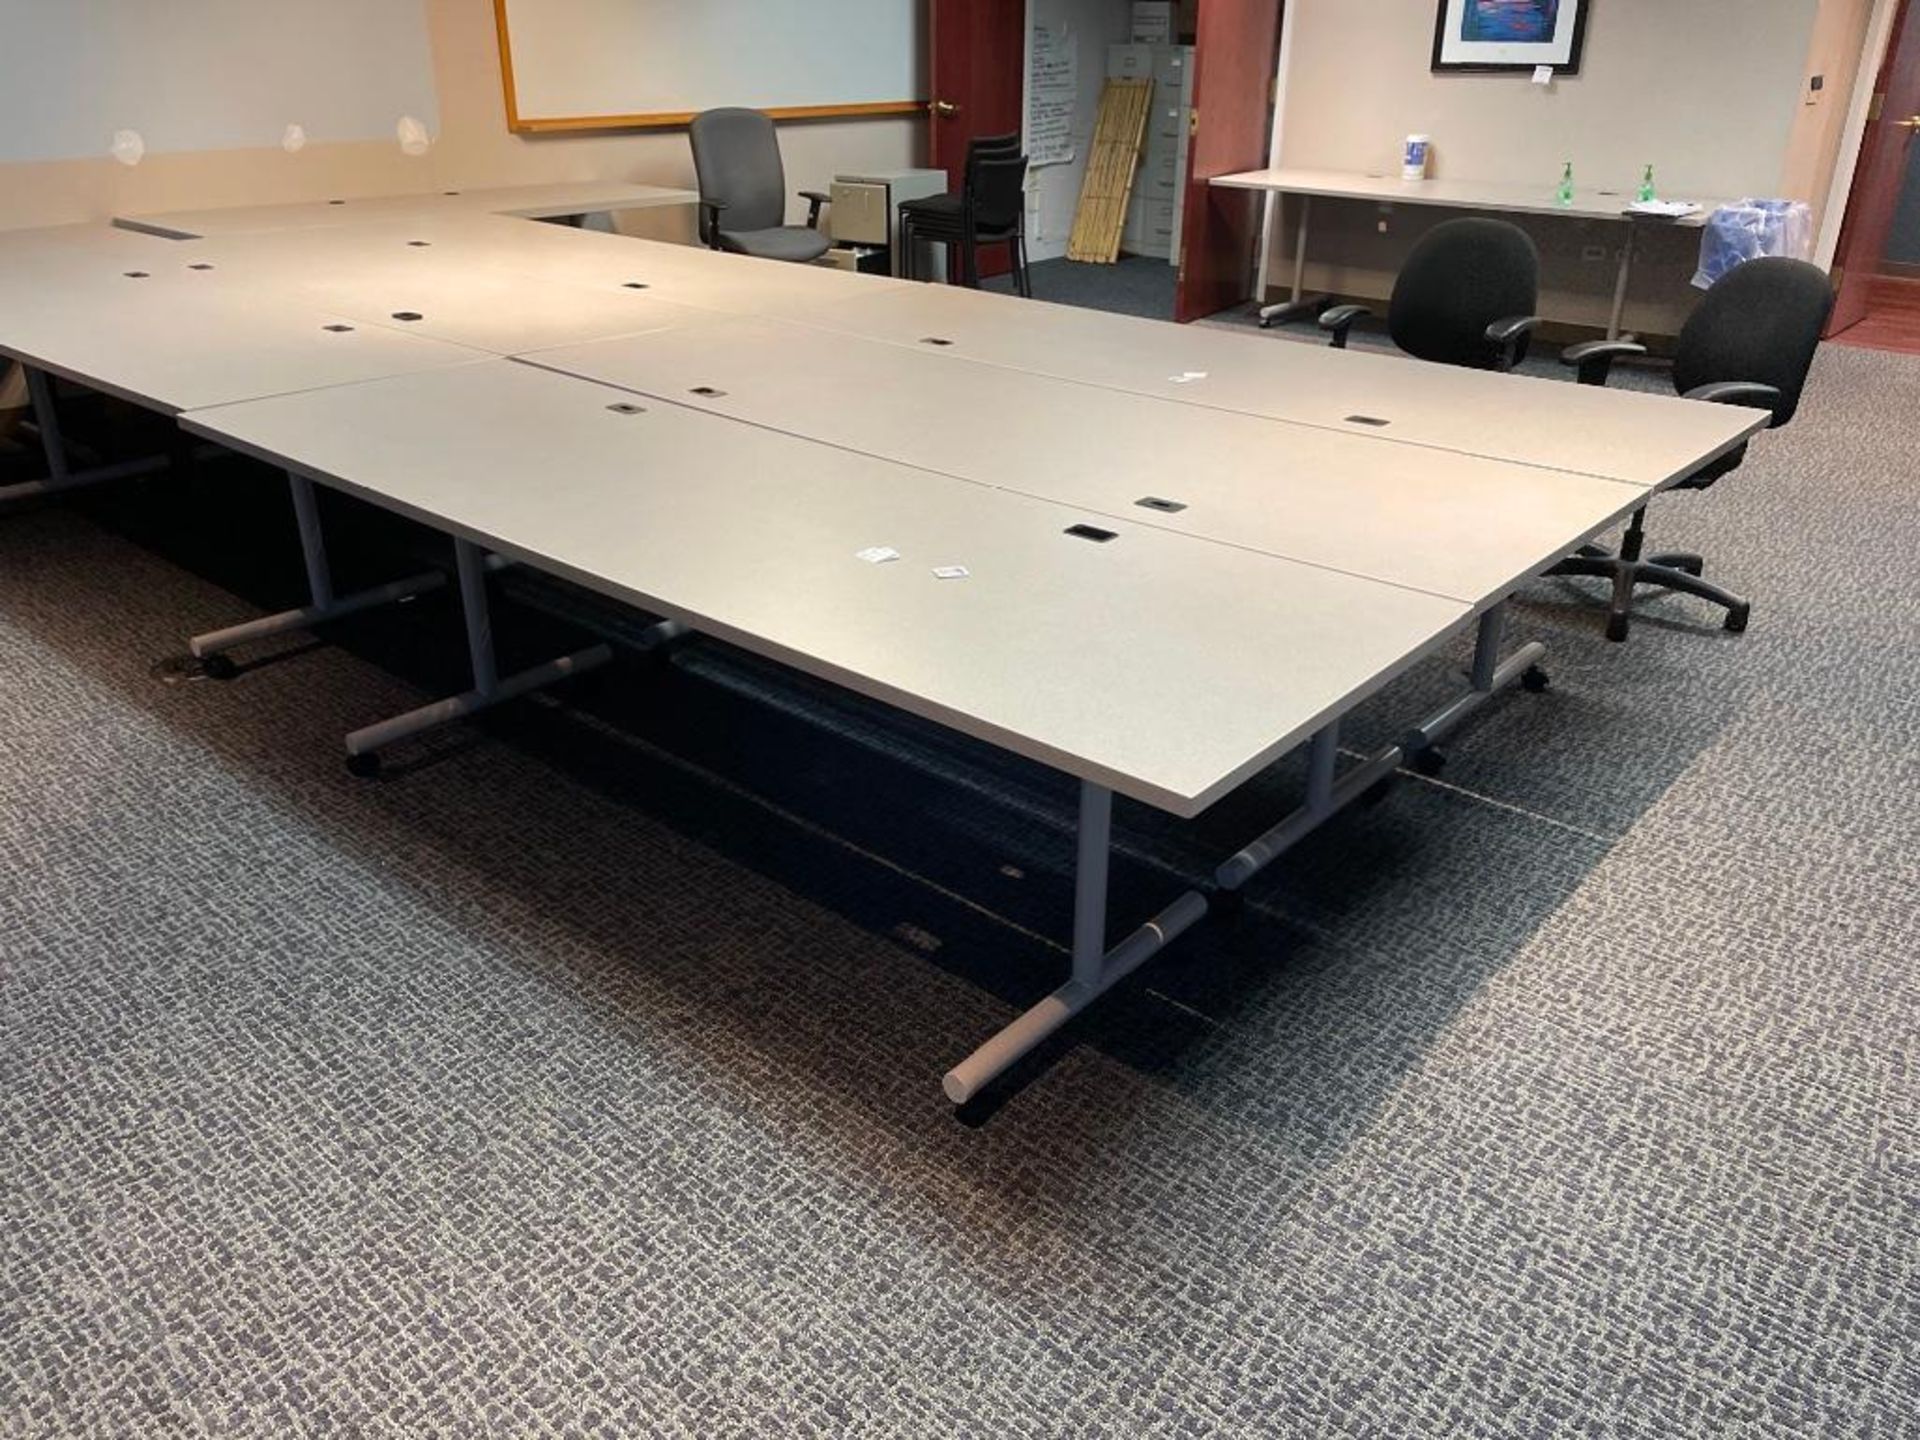 (4) 30" x 8' x 29" Tables on Casters